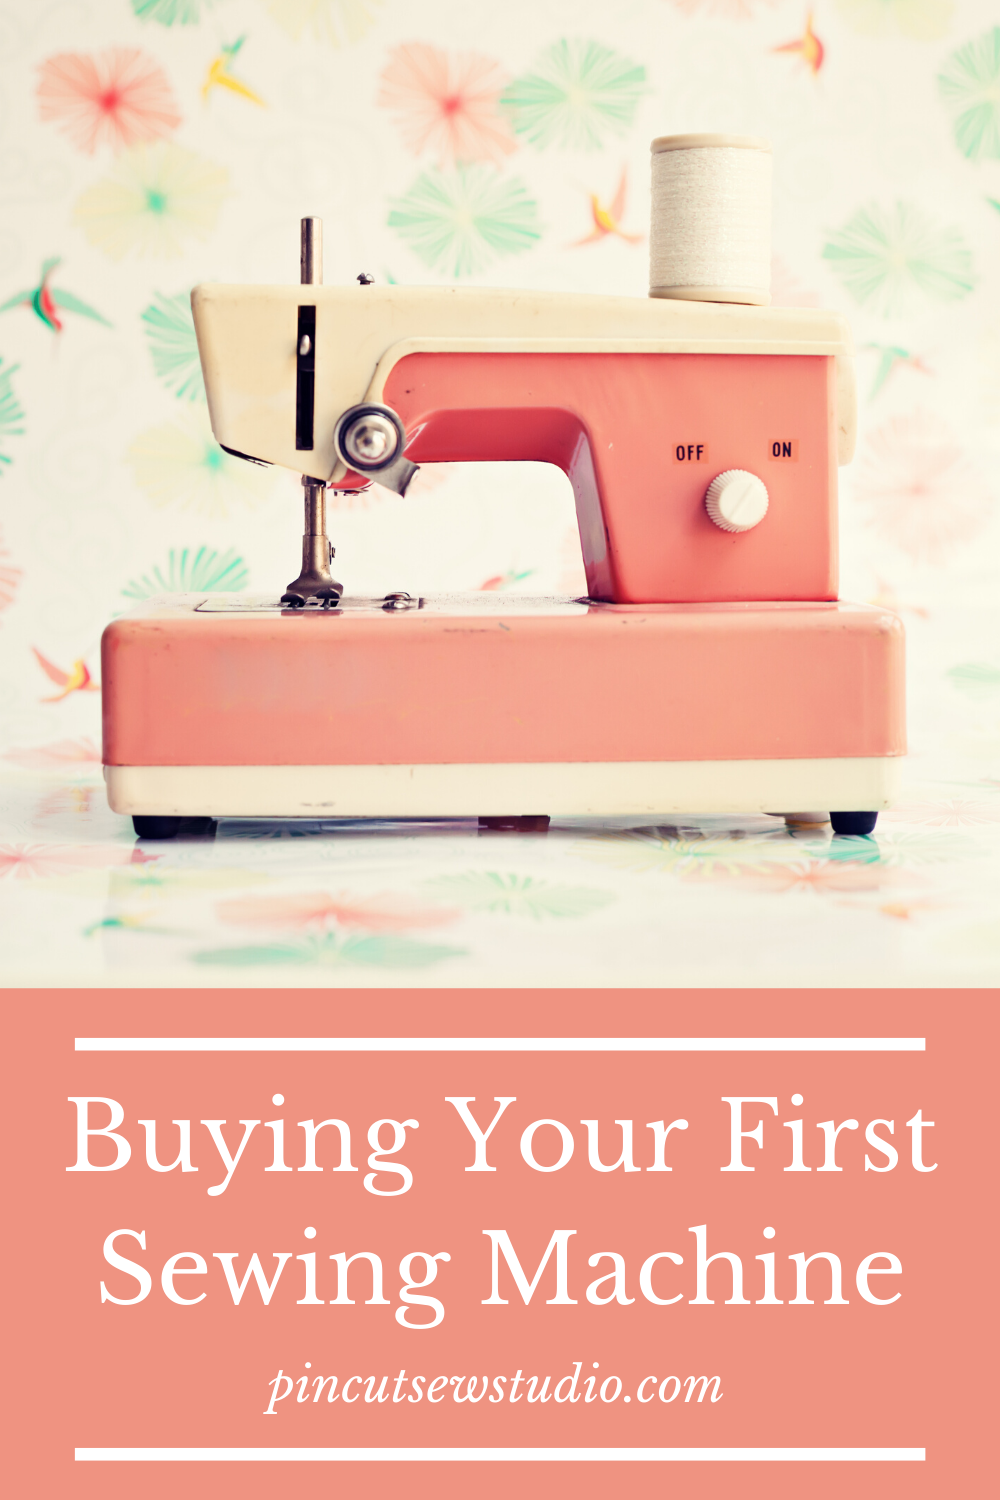 Sewing tools and supplies I regret buying : think twice before you buy 